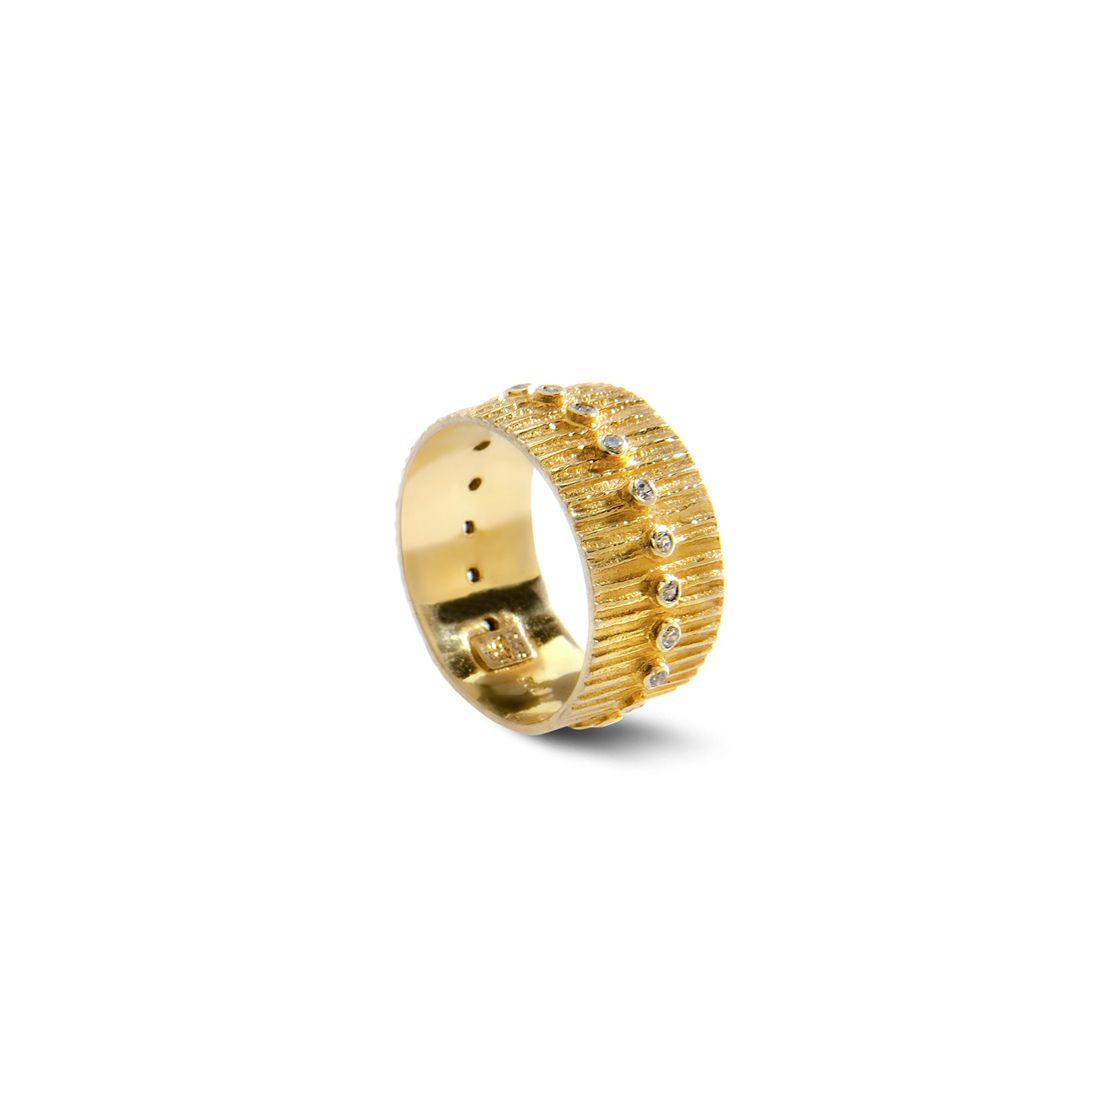 Bold golden line-hammered ring set with zircon stones.